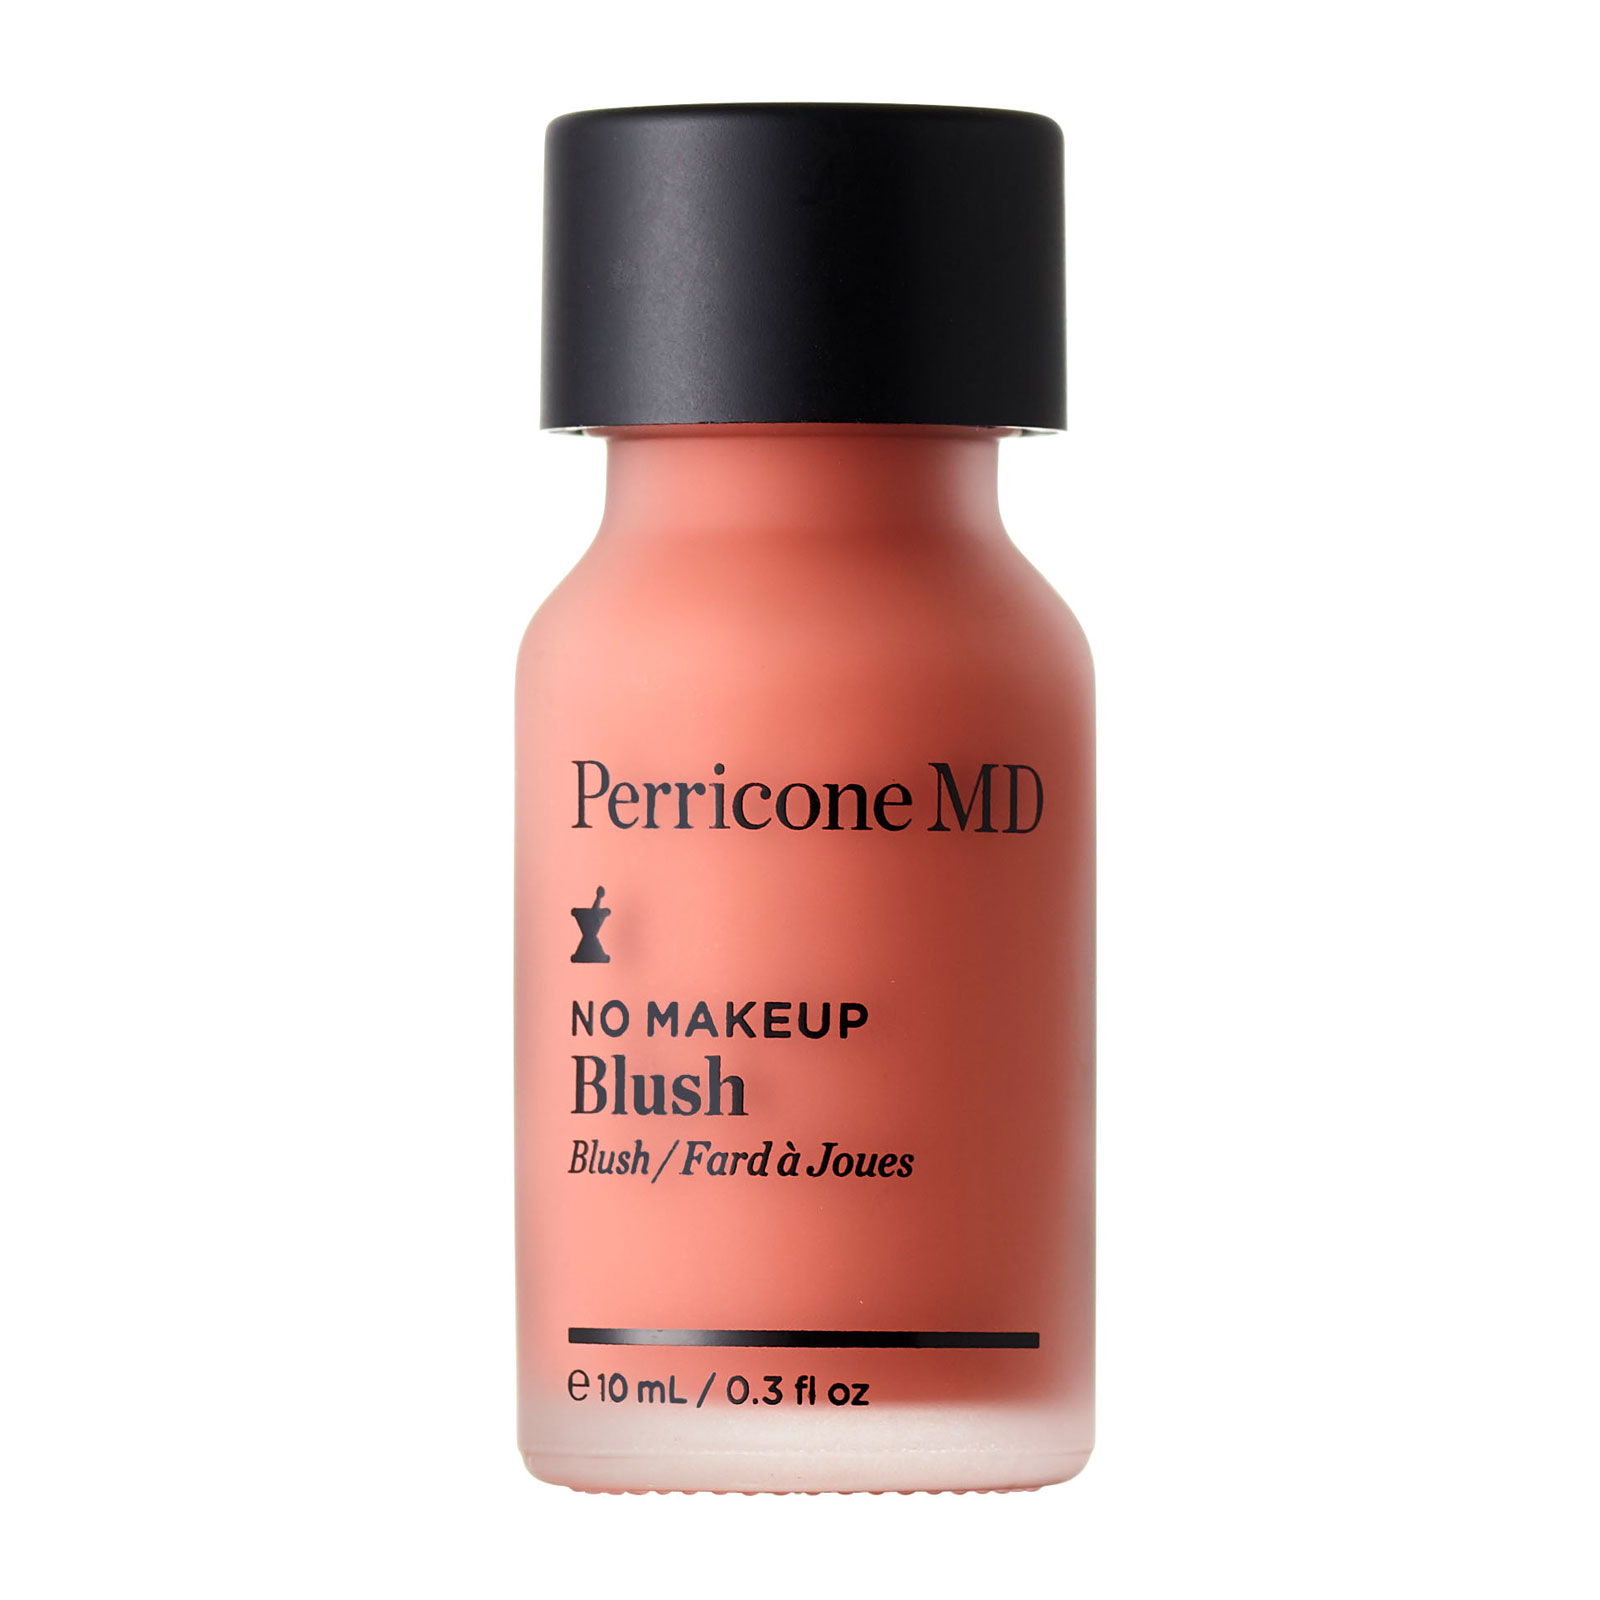 Perricone MD 无瑕亮肤修容液体腮红 10ml